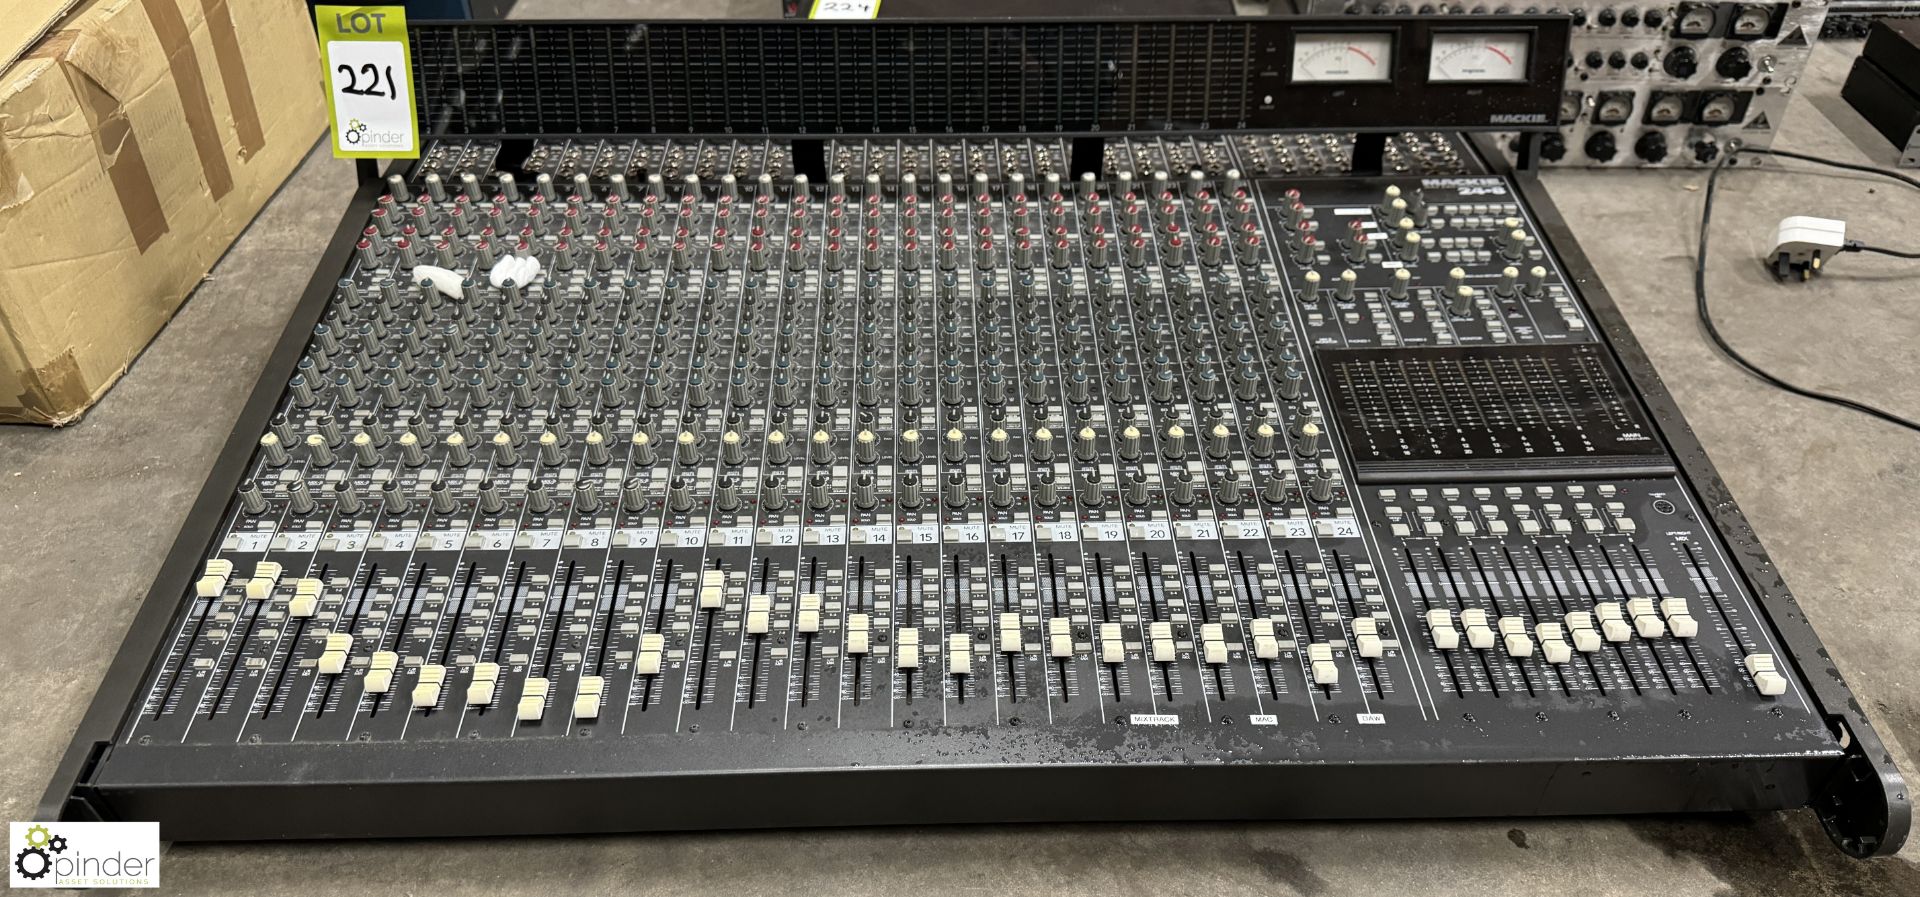 Mackie 24x8x2 8-BUS Mixing Console